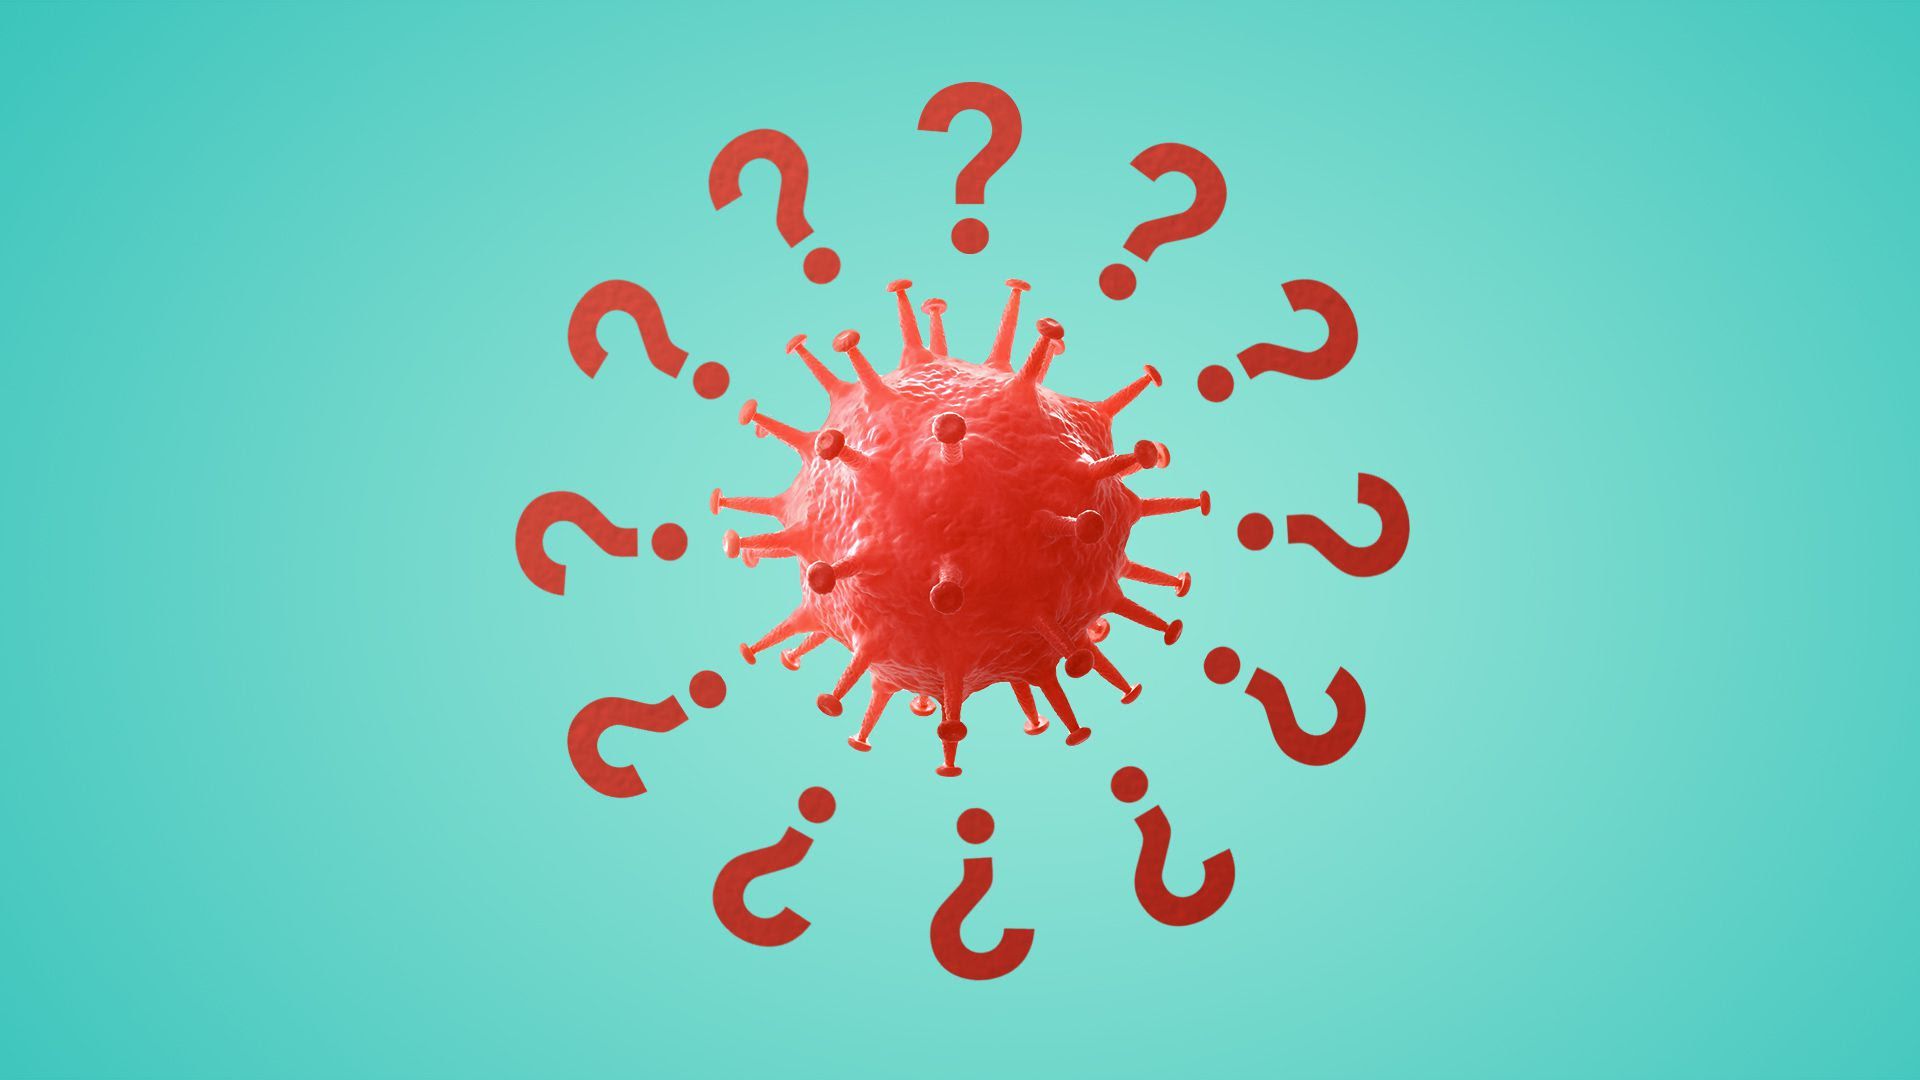 Illustration of coronavirus surrounded by question marks